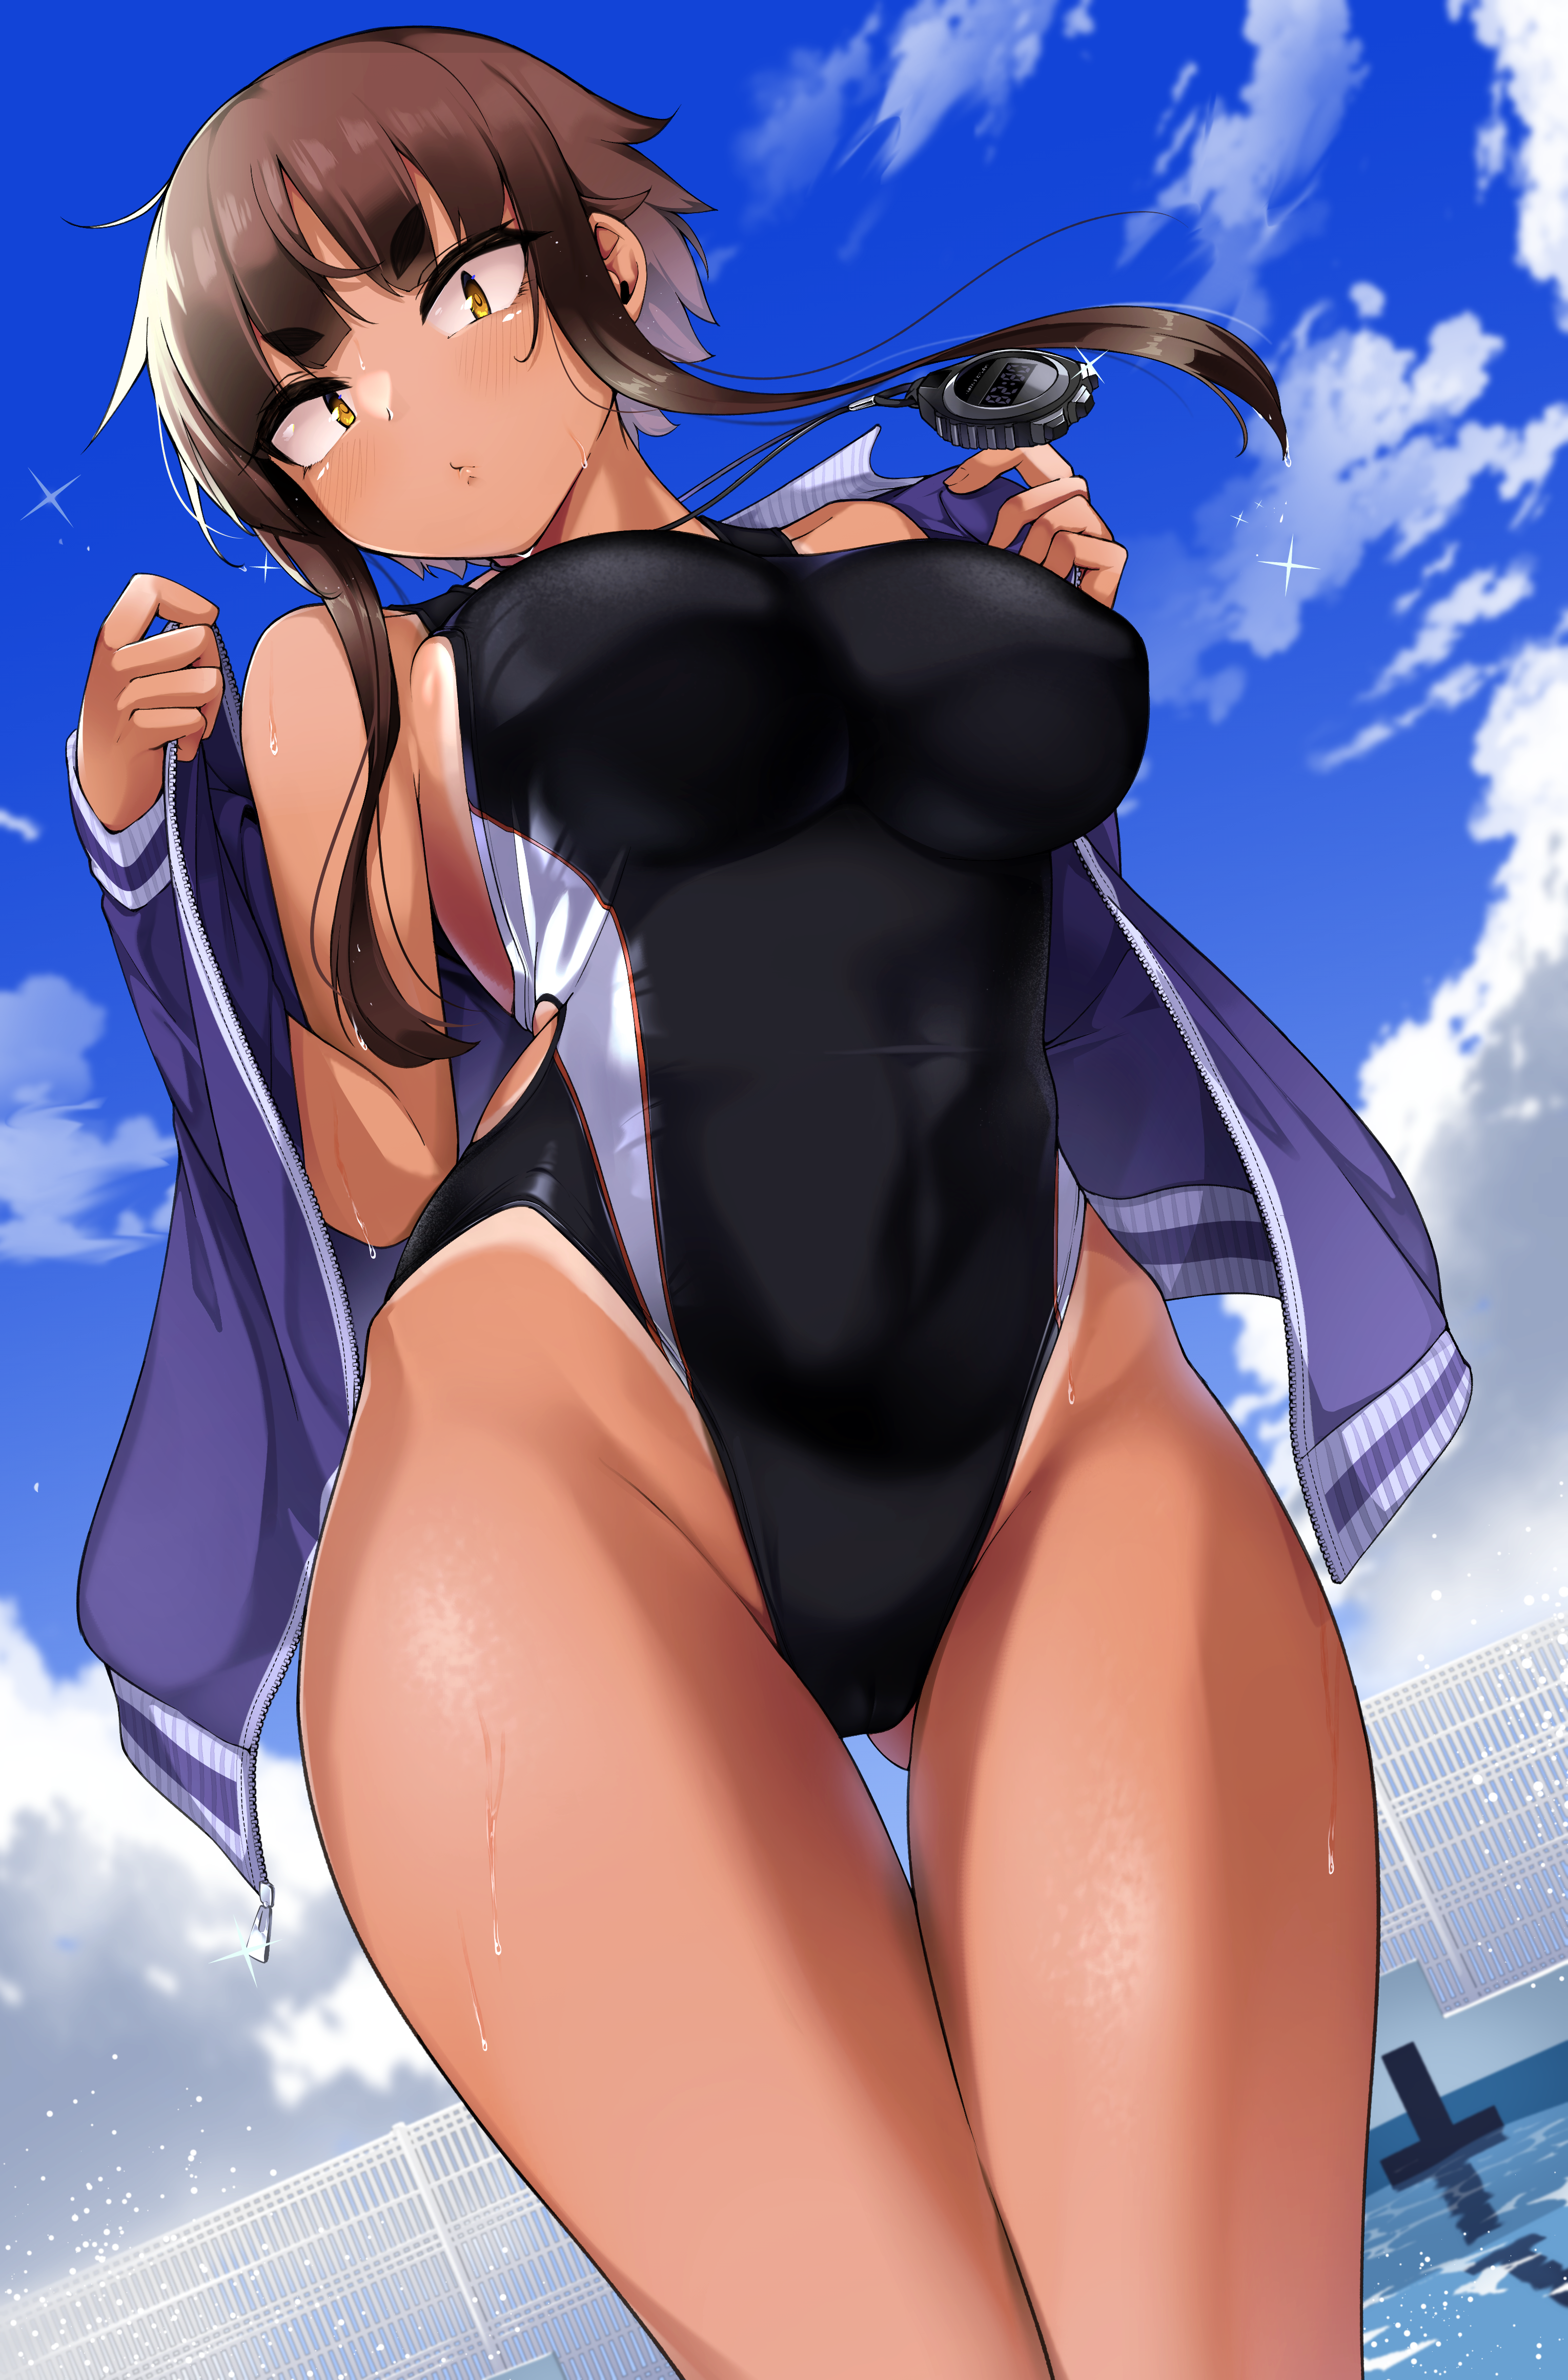 Anime 3059x4644 anime anime girls digital art artwork 2D portrait display tight clothing one-piece swimsuit swimwear tight waist skinny yellow eyes bob hairstyle blunt bangs tanned wet body the gap legs together thighs thigh-highs belly bare shoulders tan lines cameltoe Jovejun dark skin